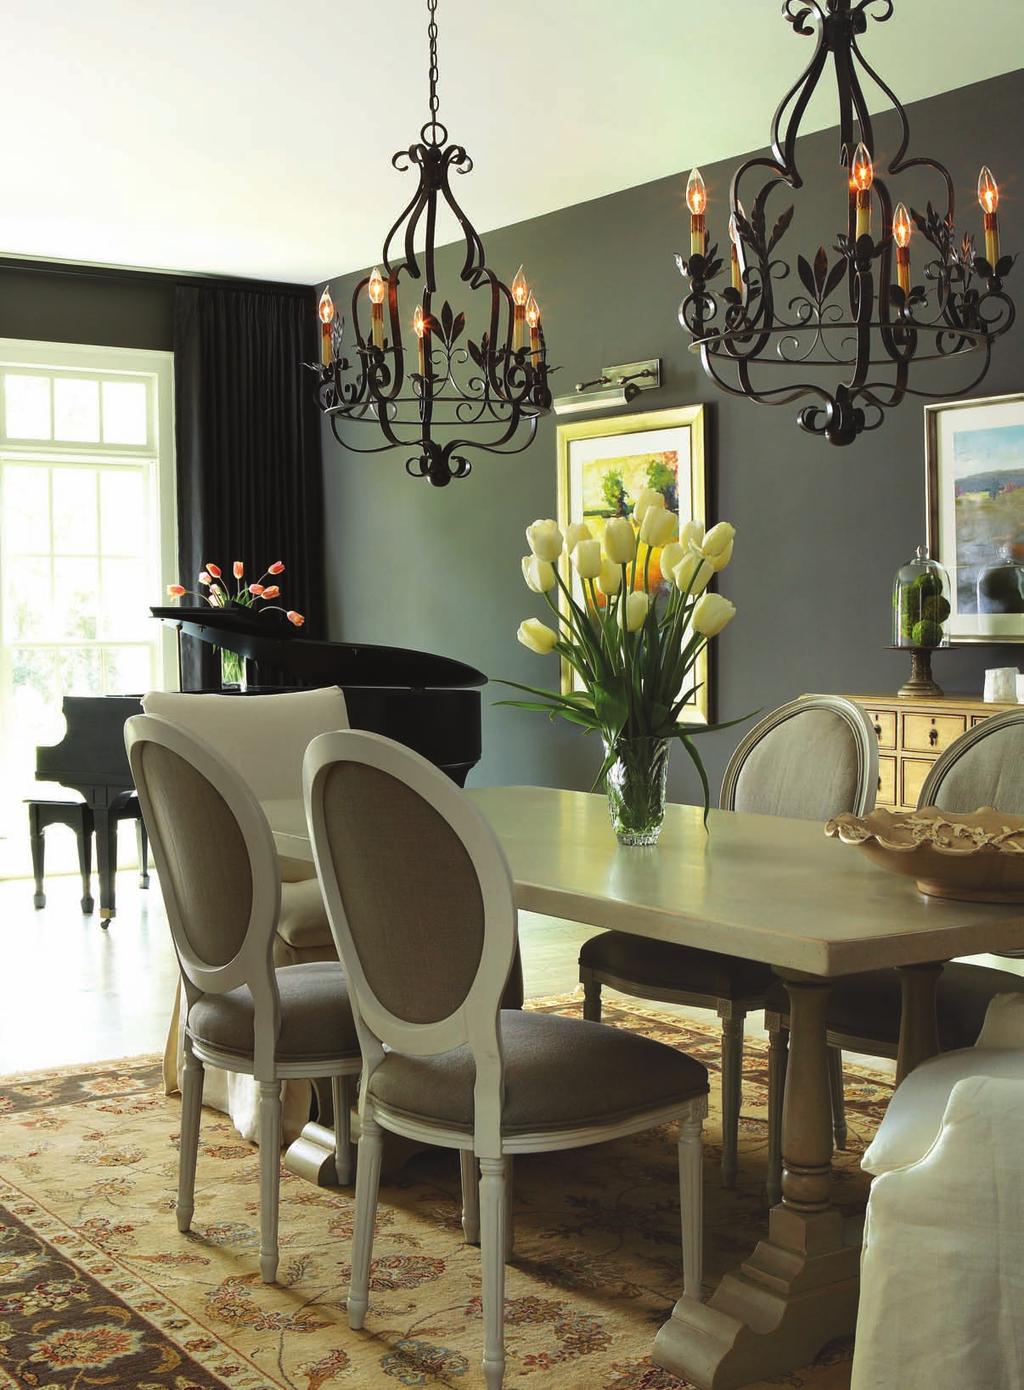 Dine in Style. The dining room table sits near an area devoted to music. A pair of iron chandeliers add drama and charm, making the room even more special, says Janie.